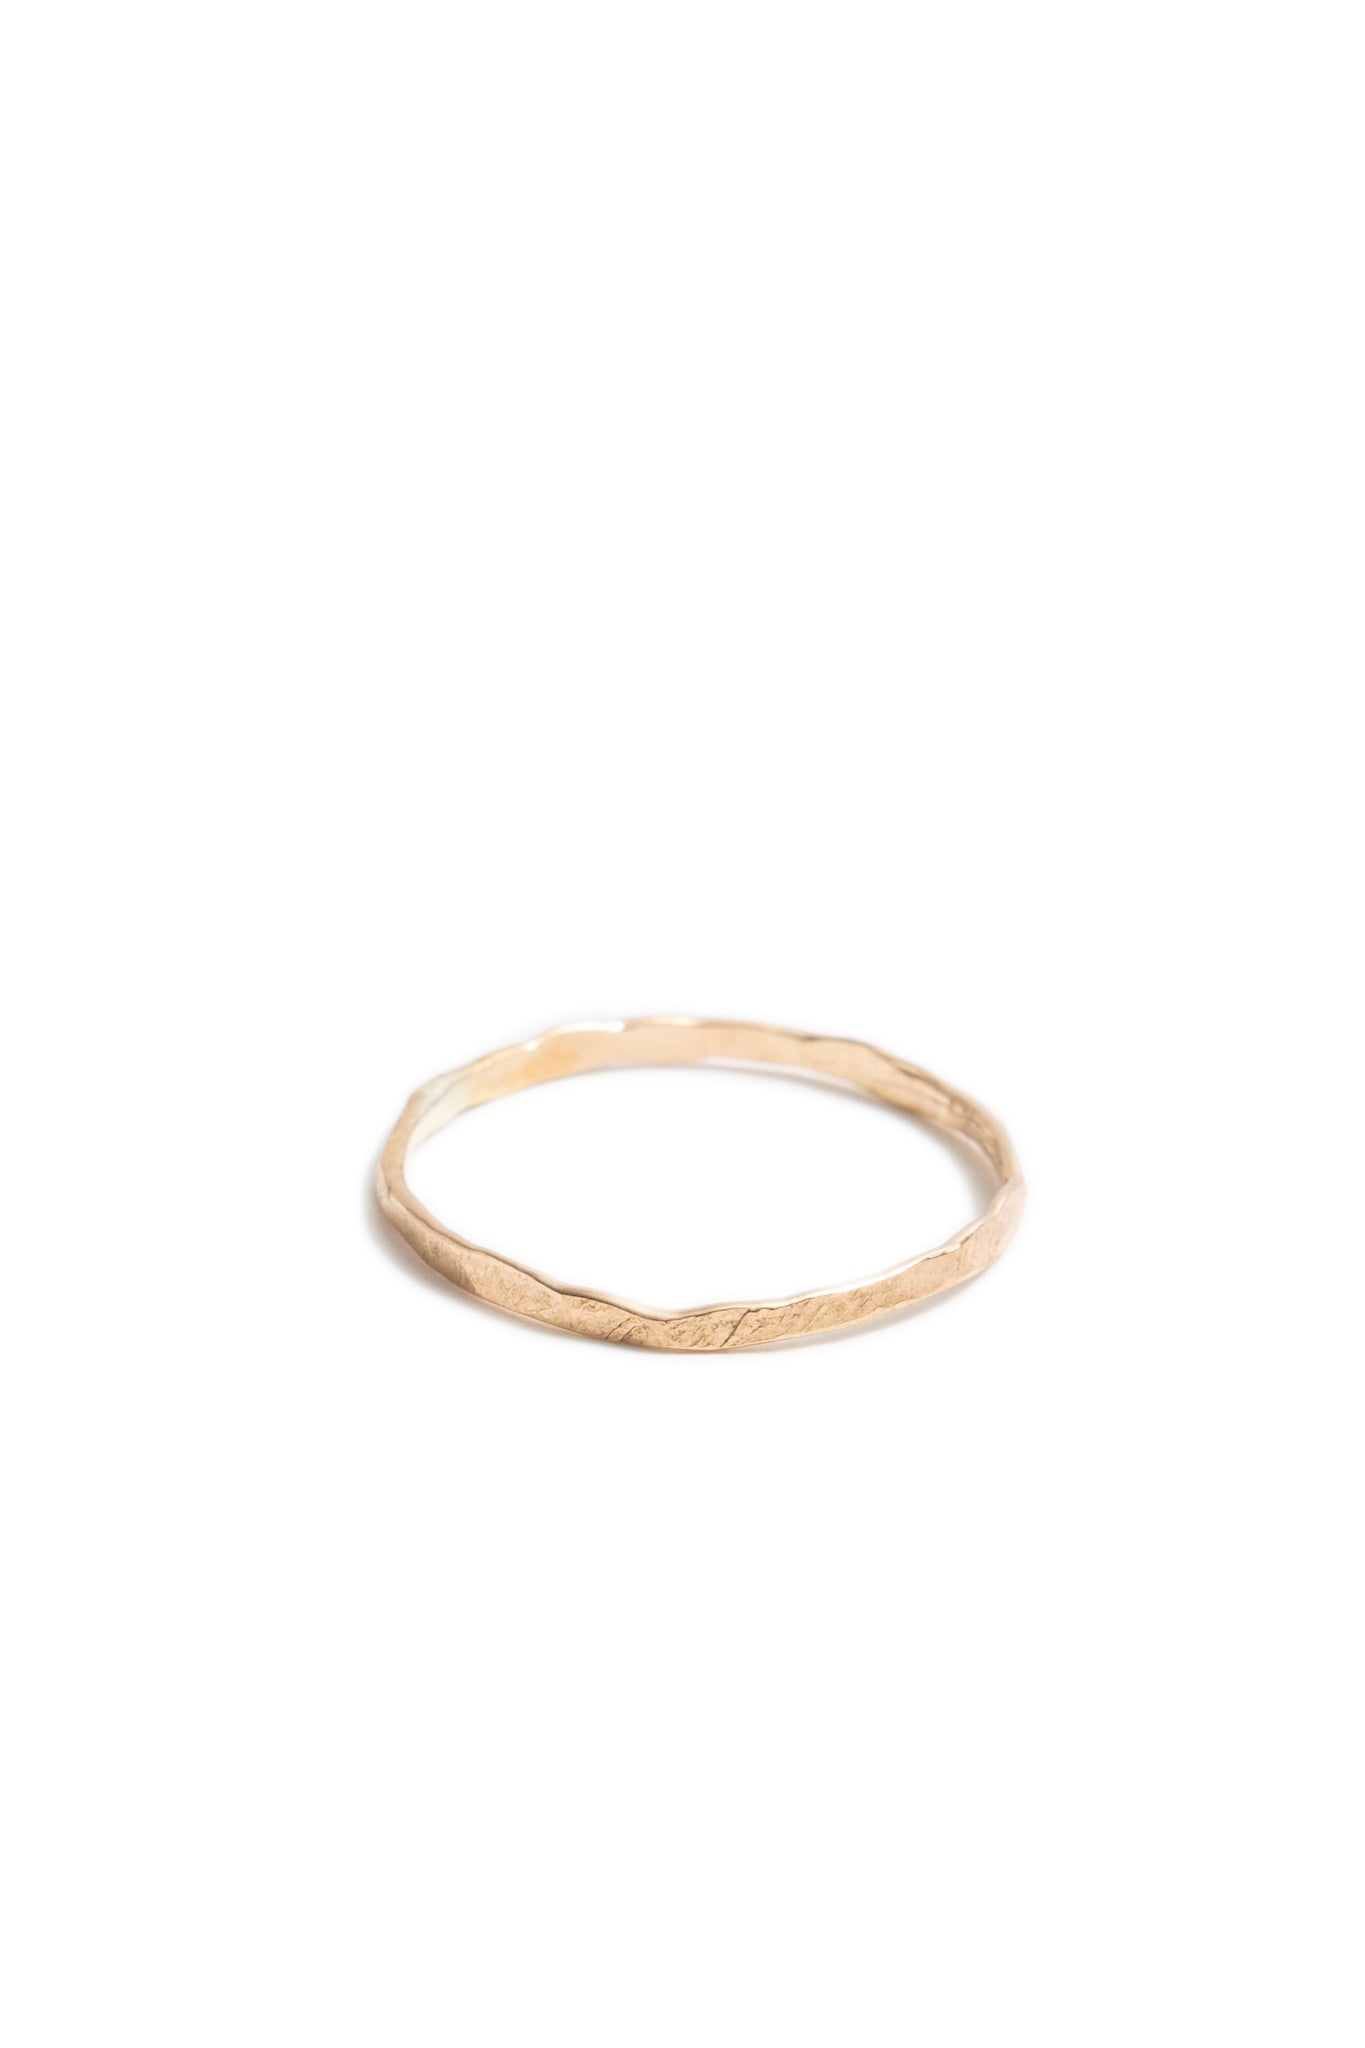 Tiny 14K Gold Fill Hammered Stacking Ring